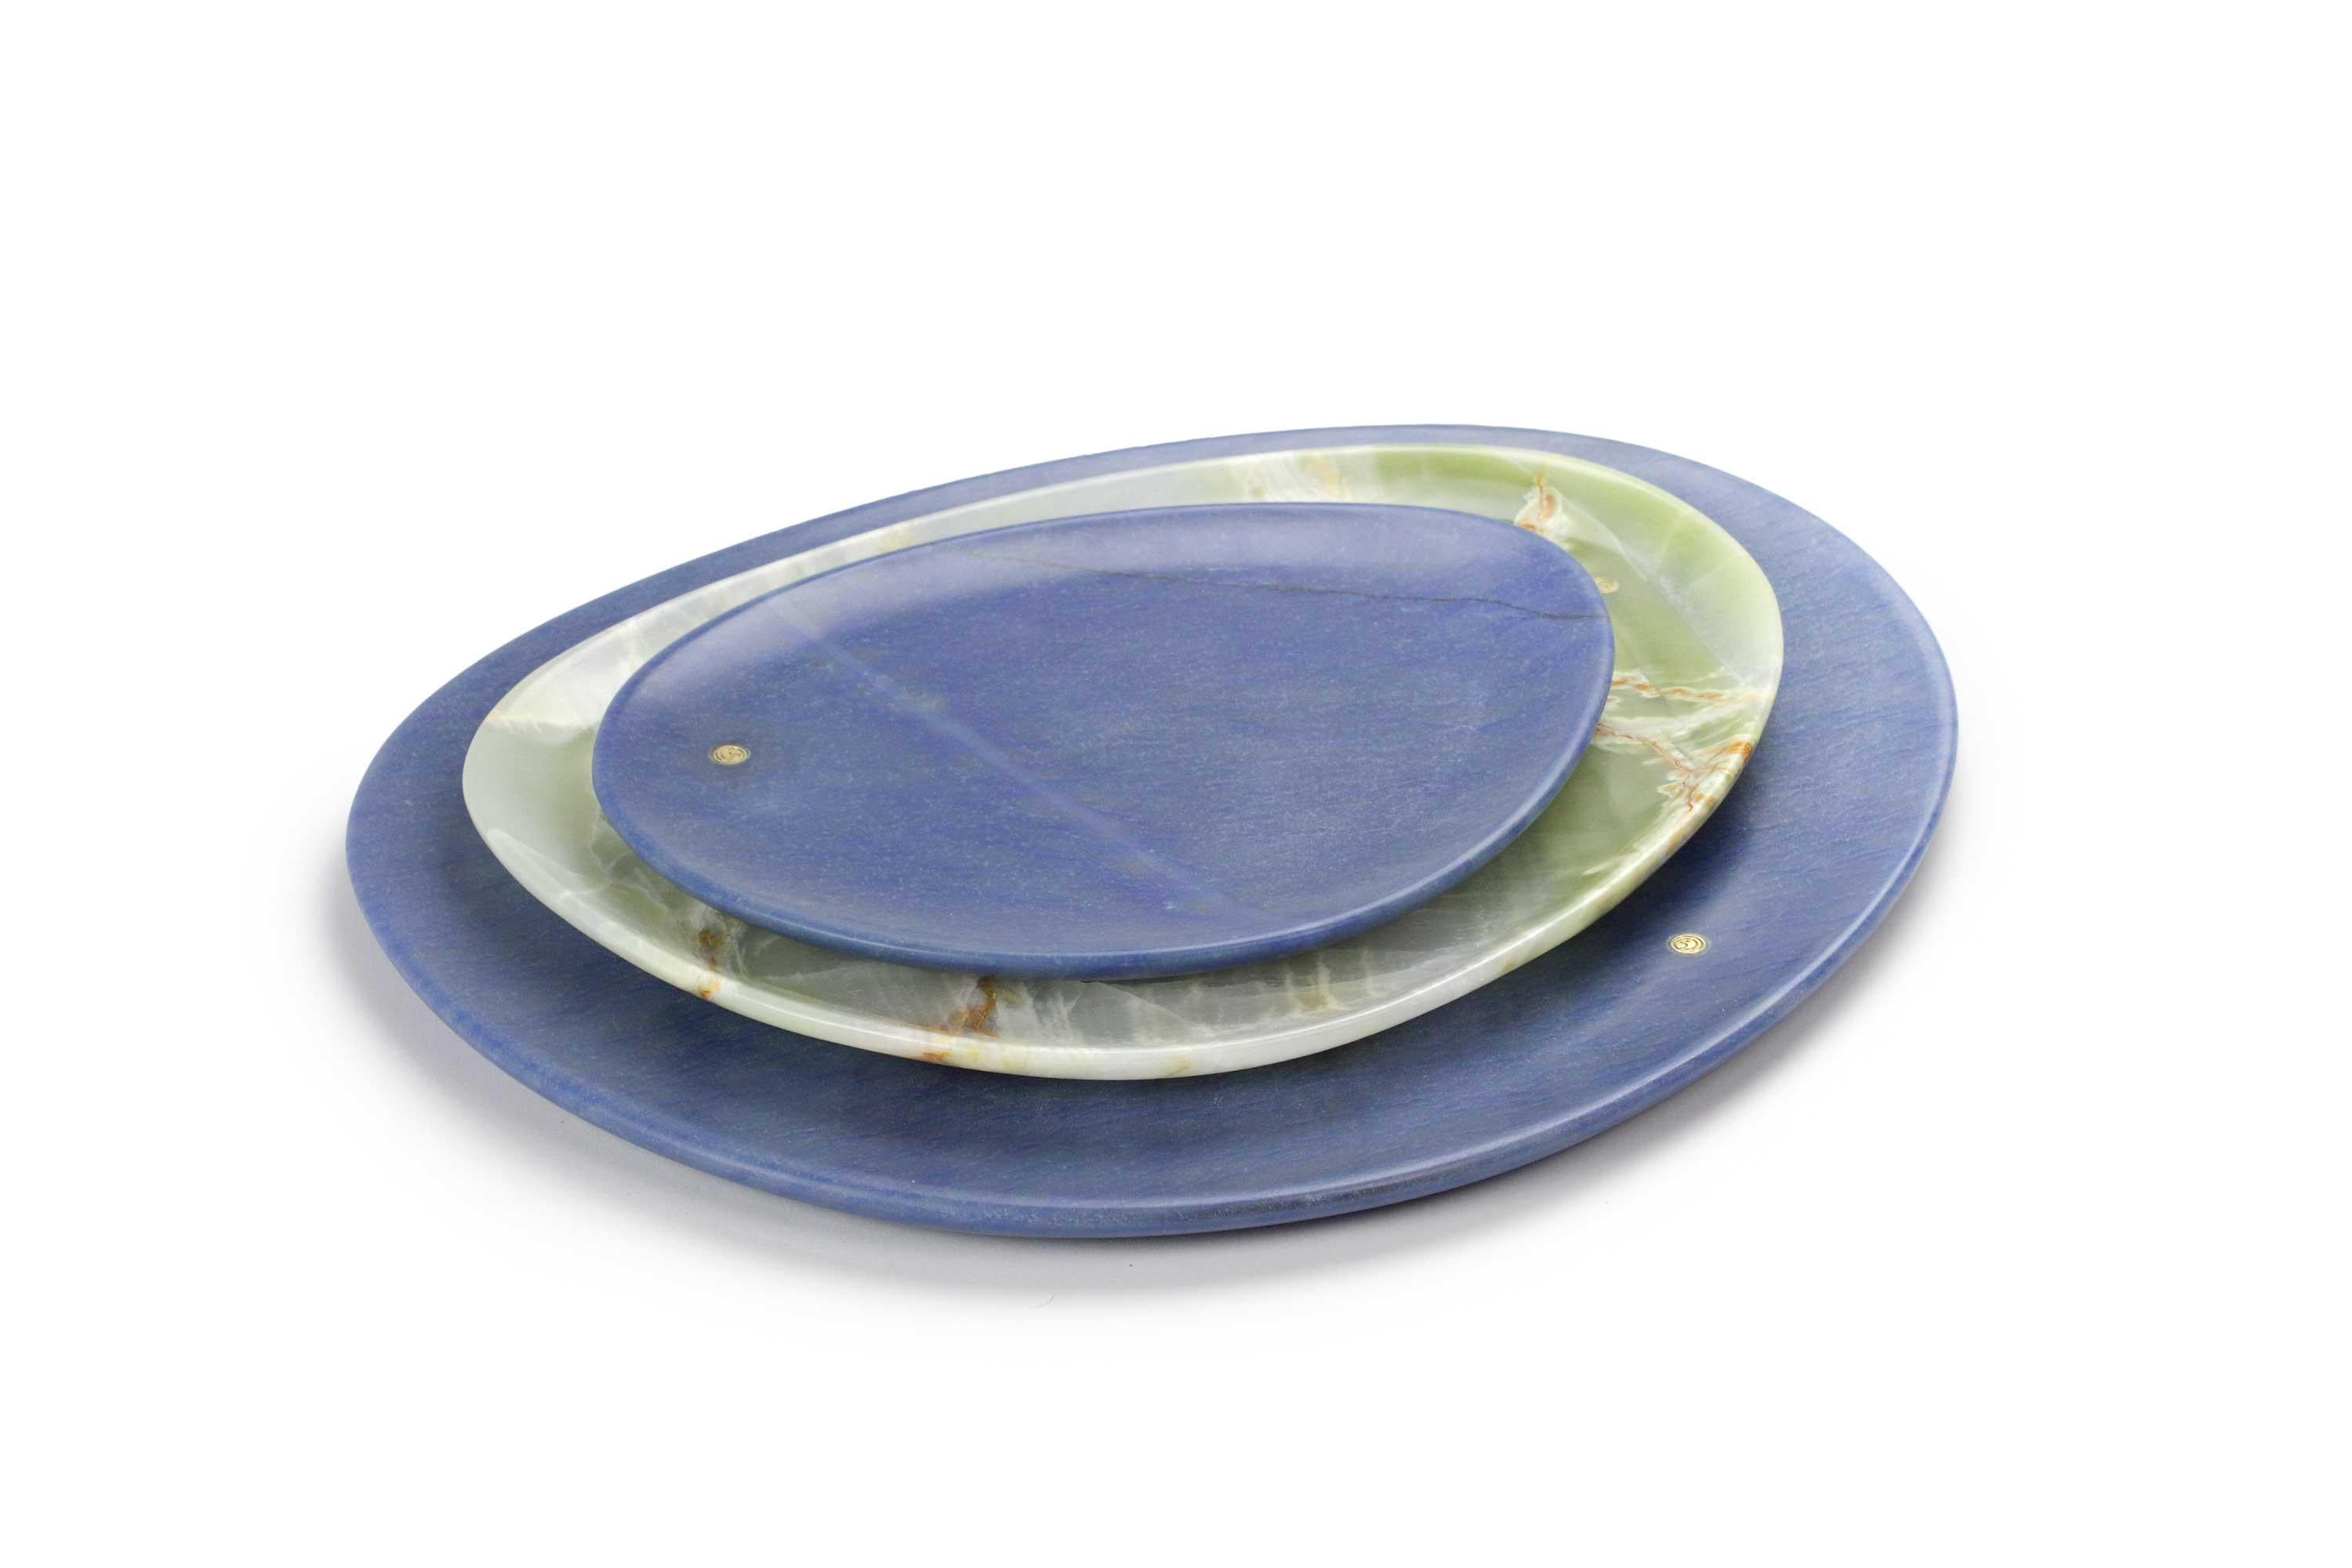 Hand carved presentation plates in extra blue Azul Macaubas and green onyx. Polished finishing. Multiple use as plates, platters and placers. 

Dimensions: Small - L24 W20 H1.8 cm, Medium - L30 W28 H1.8 cm, Big - L36 W35 H1.8 cm.
Available in